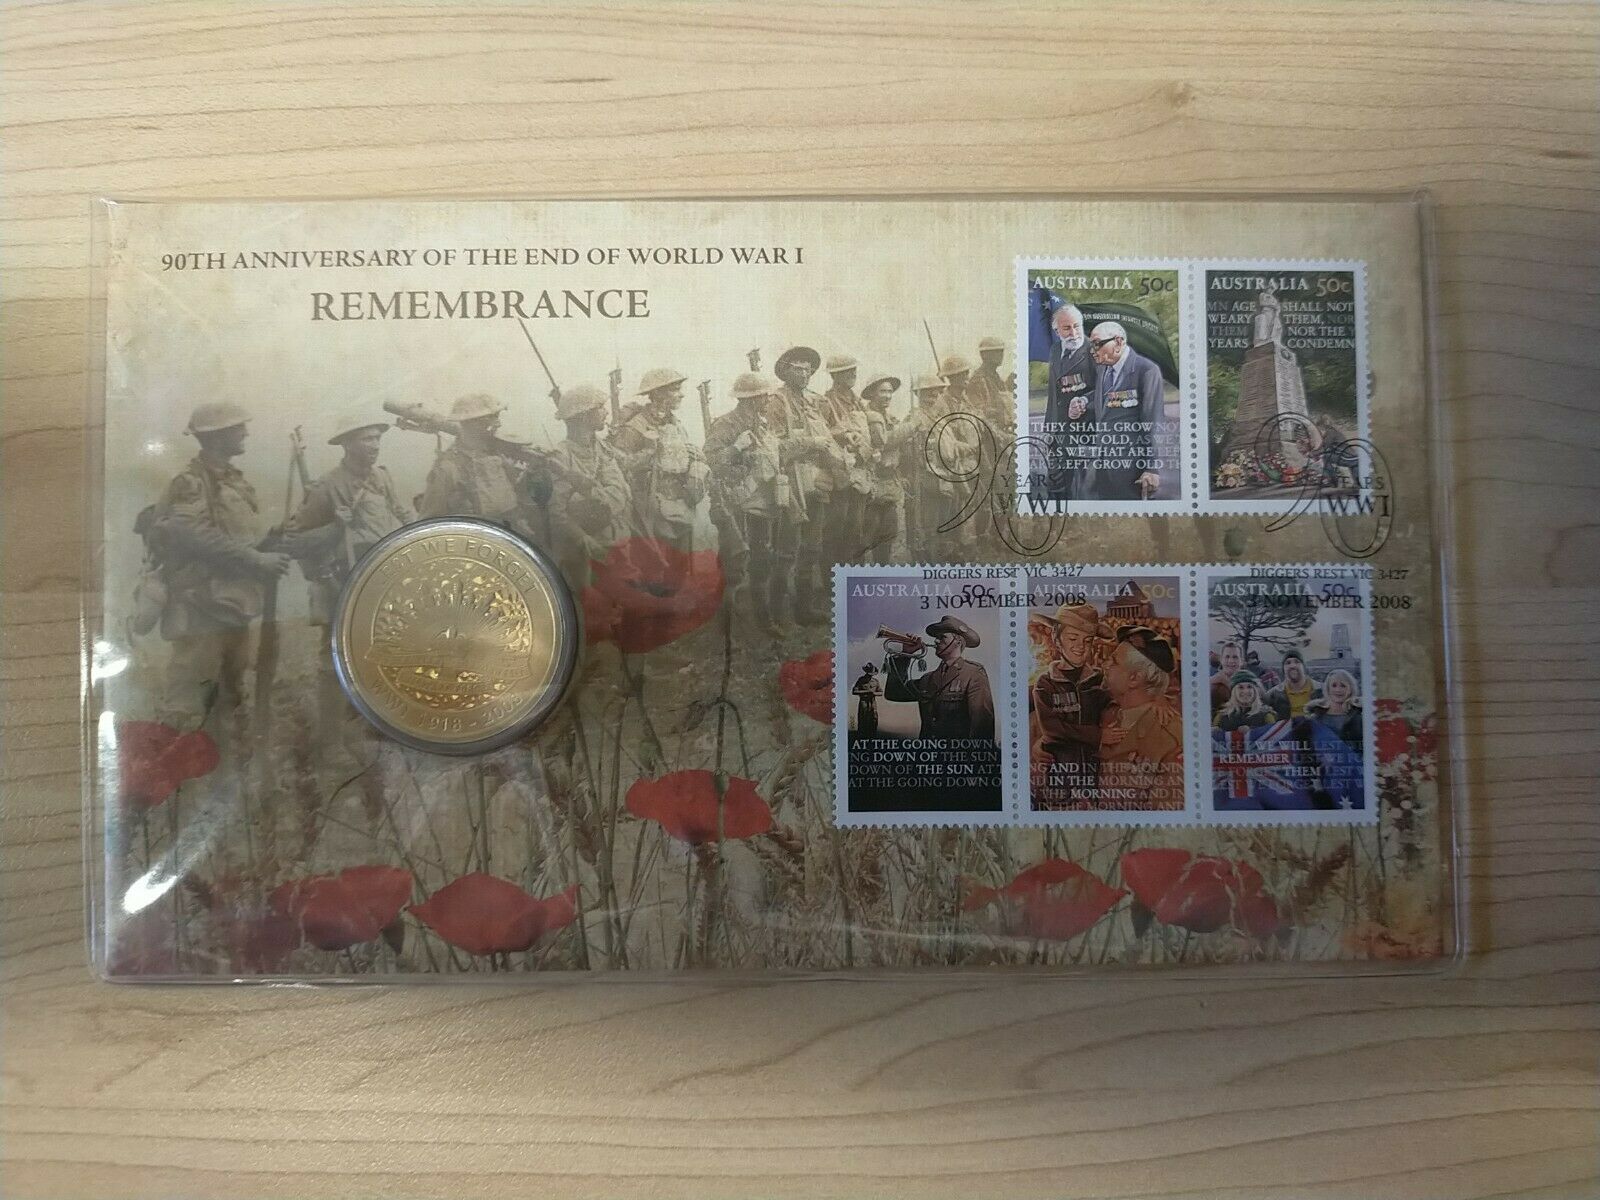 Australia $1 2008 90th Anniversary of the End of World War I Remembrance PNC First Day Issue